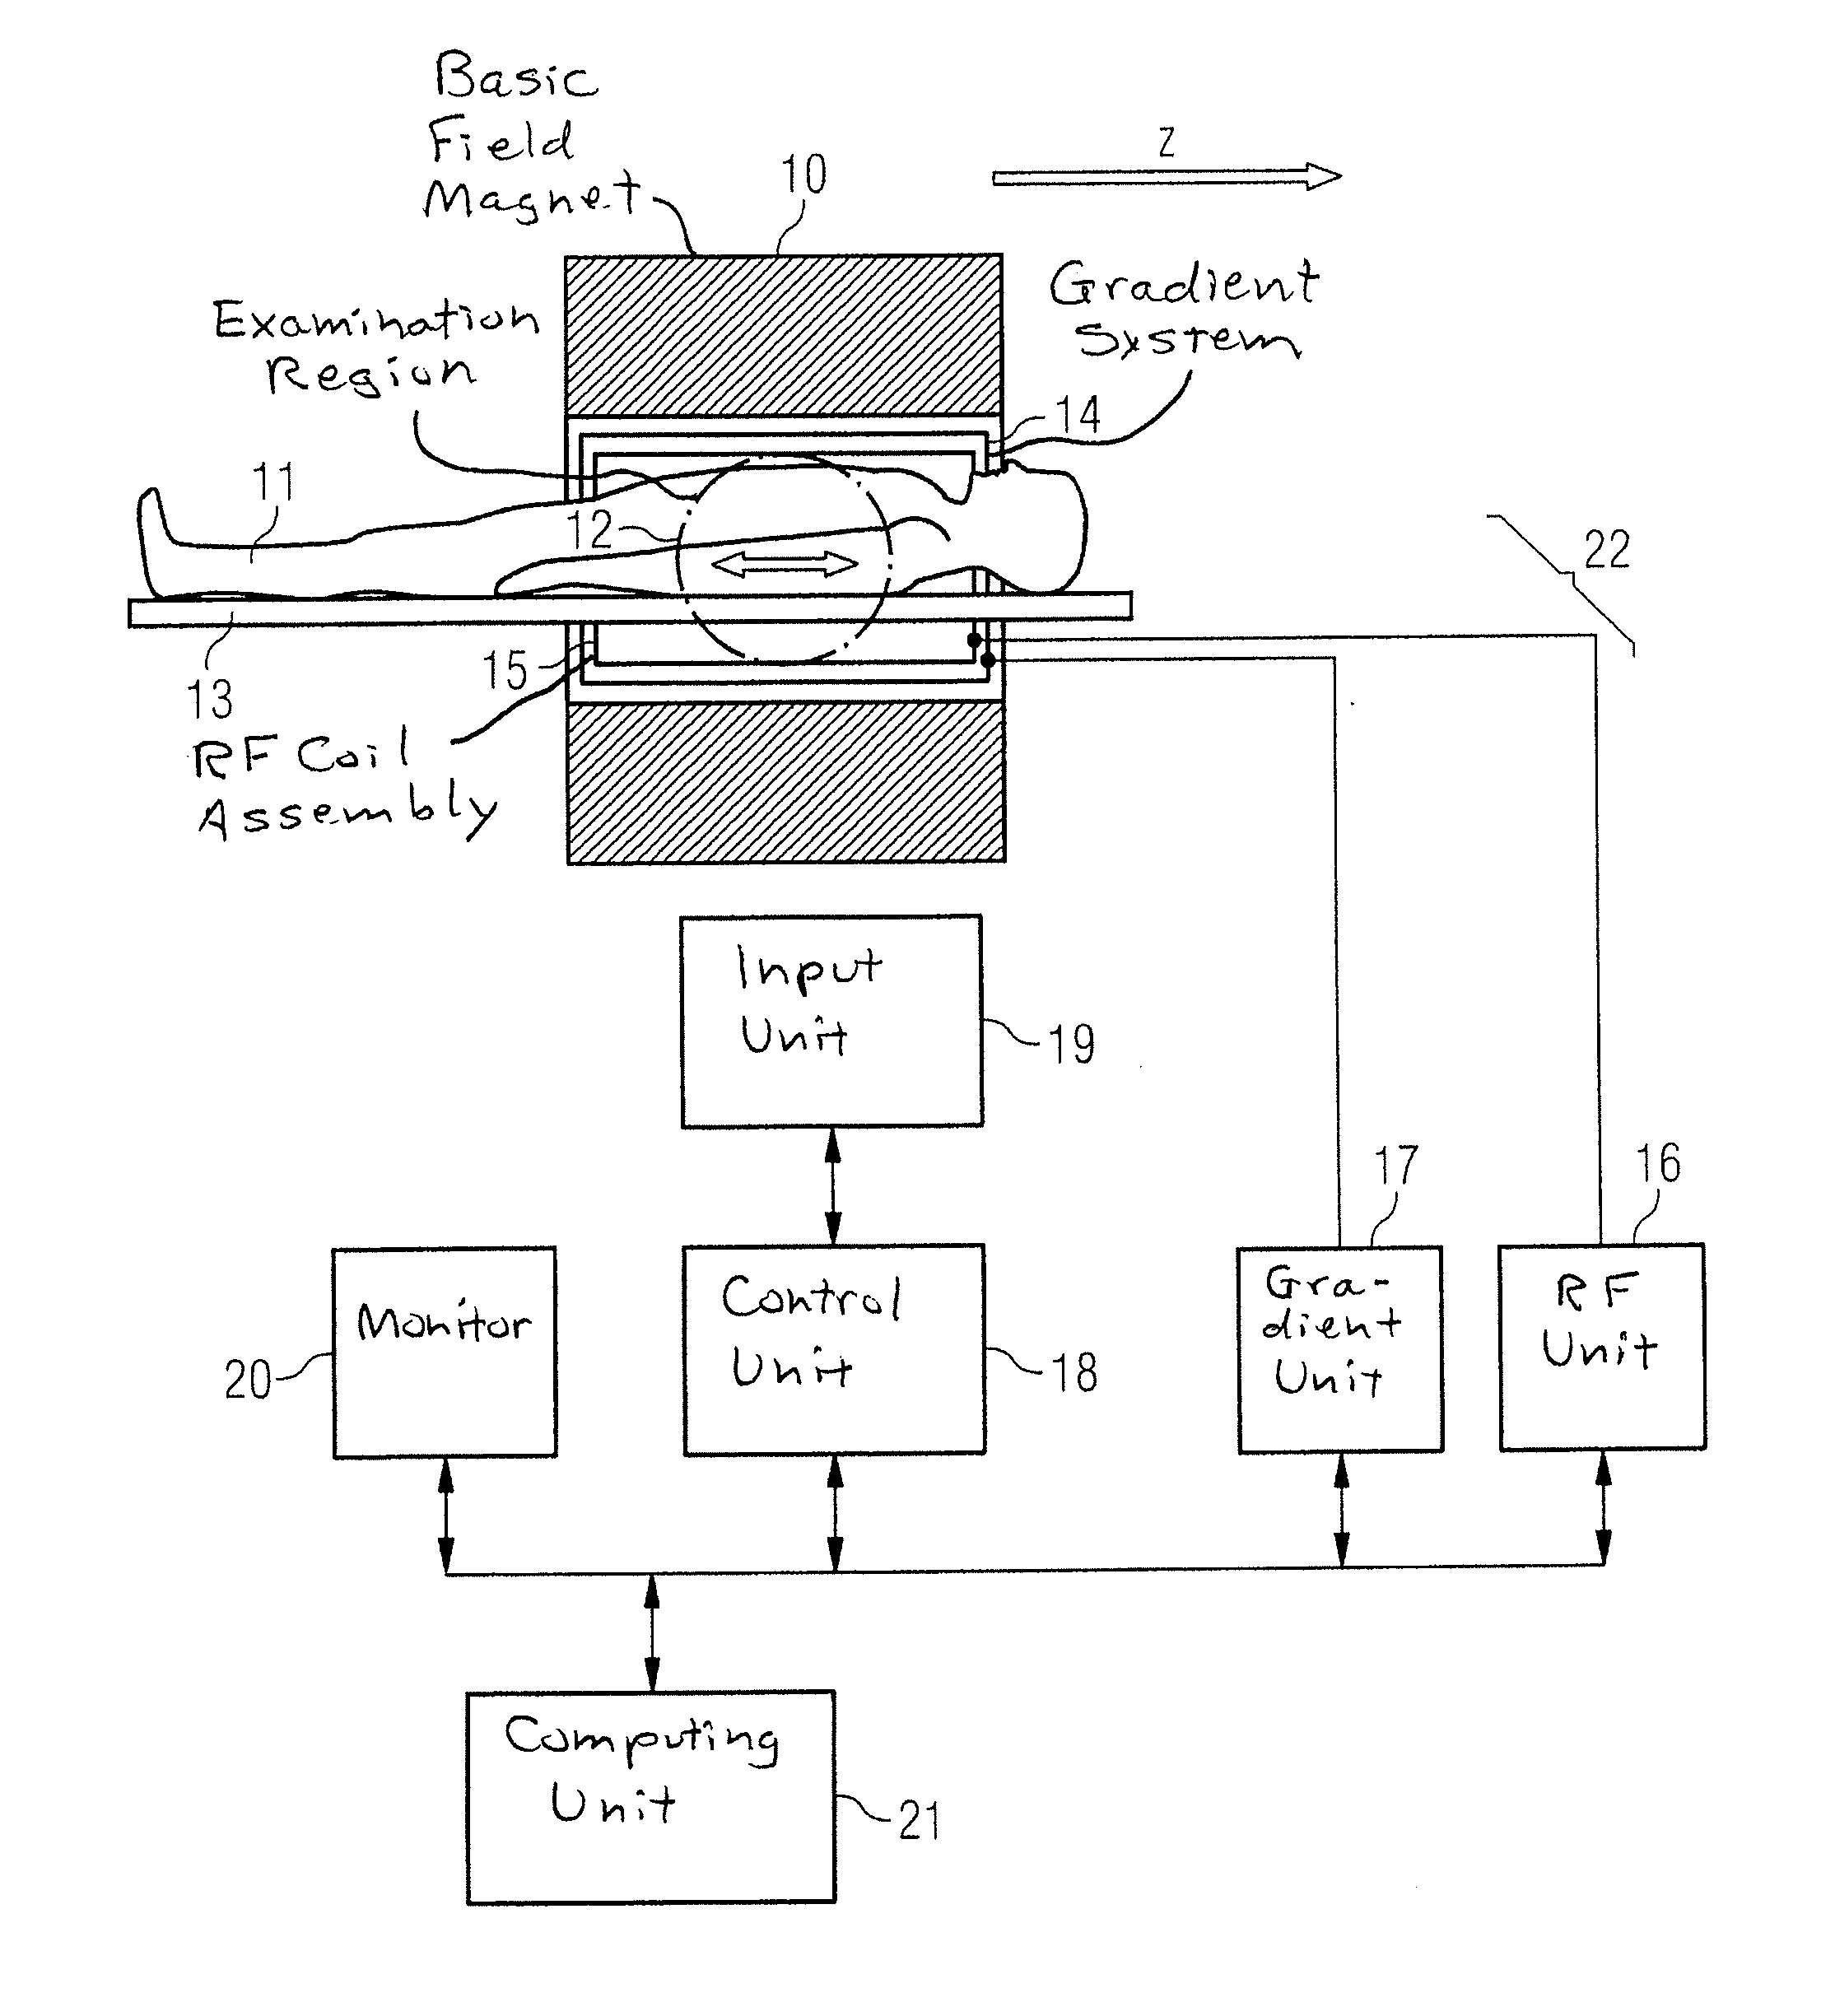 Magnetic resonance method and apparatus for time-resolved acquisition of magnetic resonance data